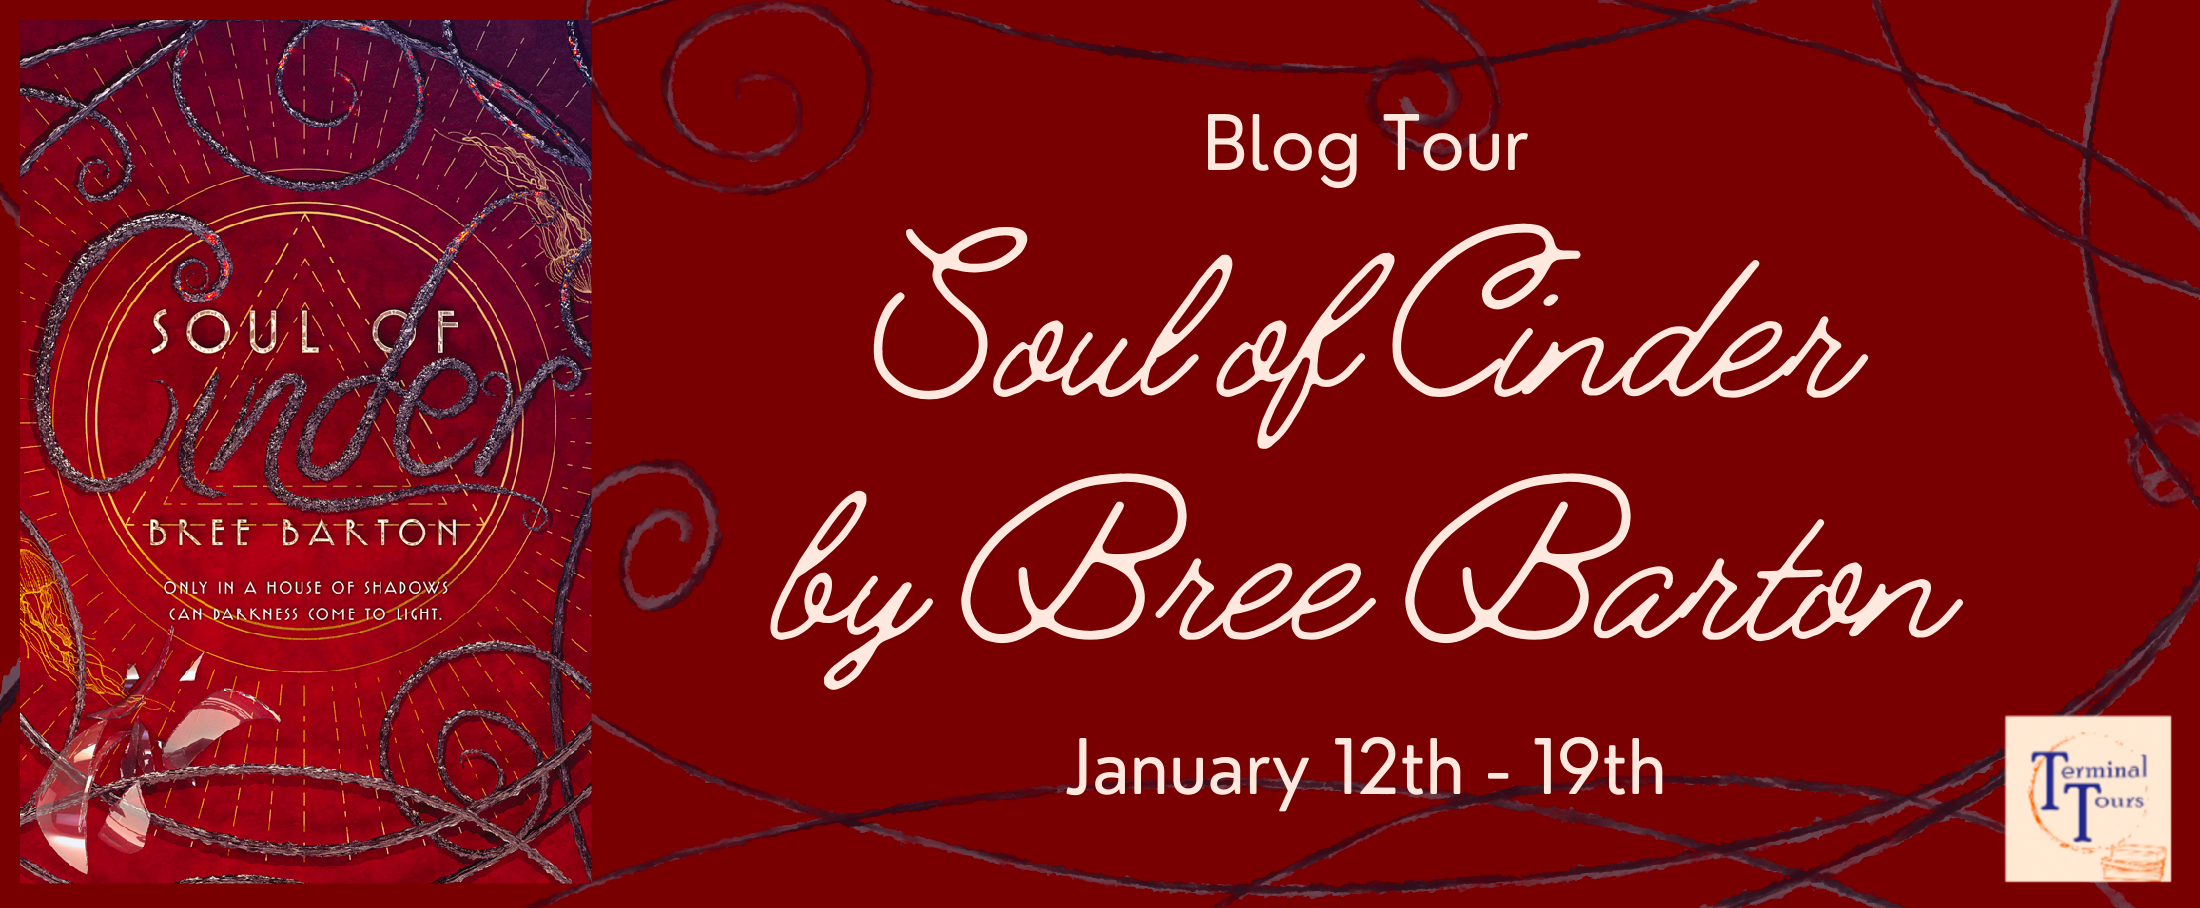 Blog Tour: Soul of Cinder by Bree Barton (Guest Post + Giveaway!)